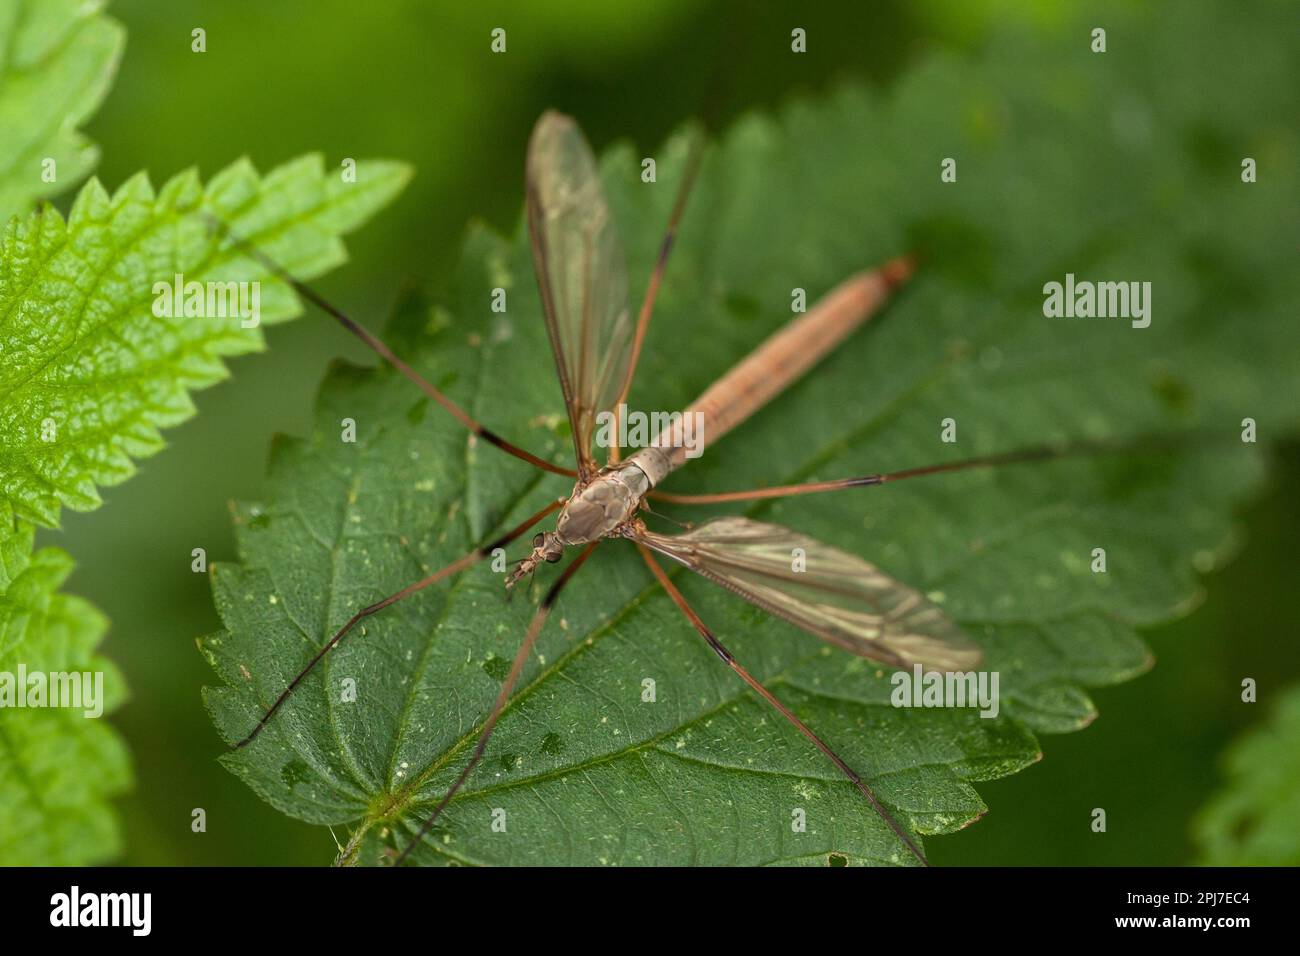 A brown crane fly sitting on a green leaf. Stock Photo